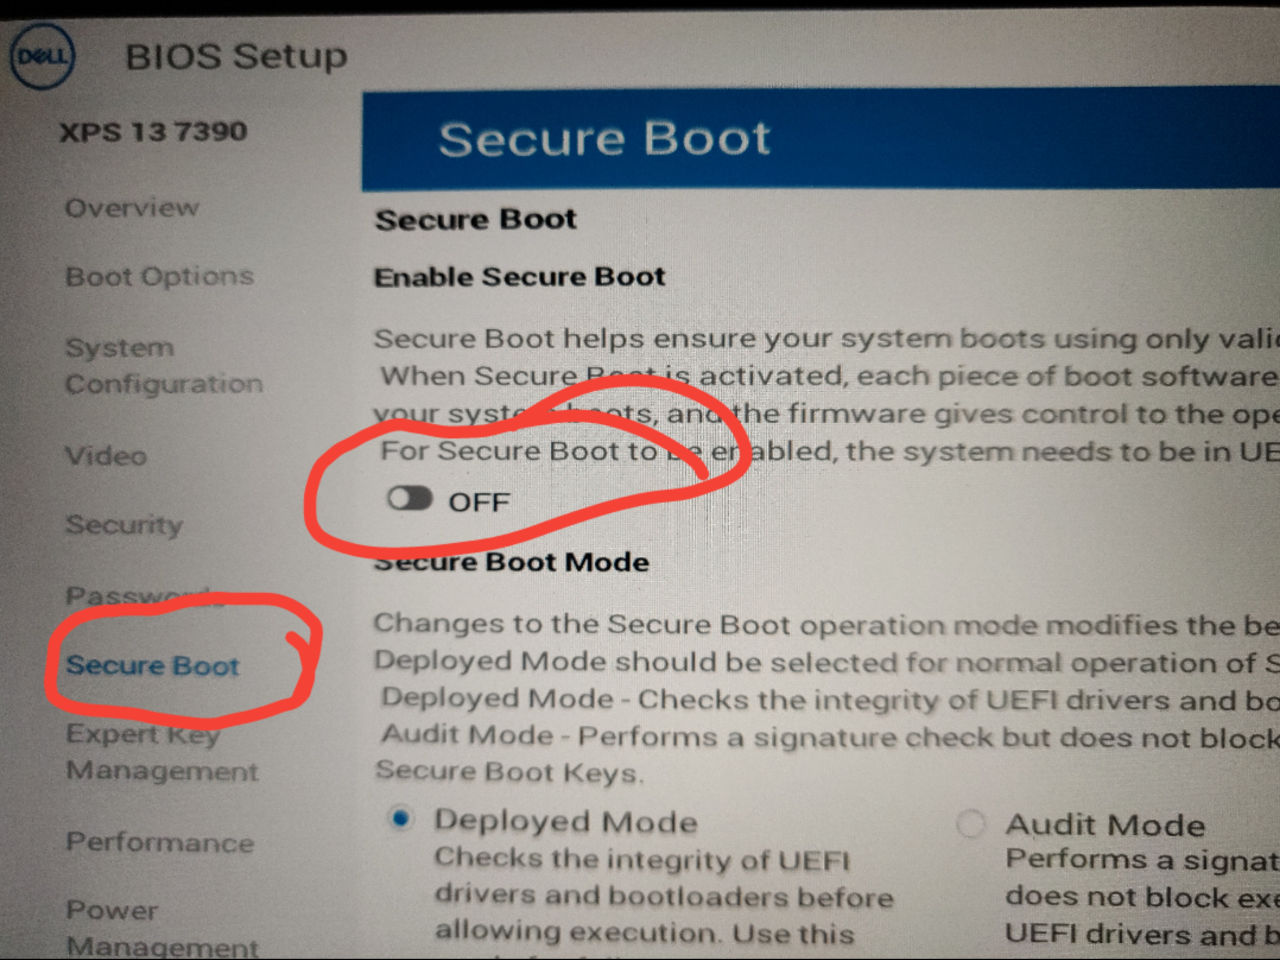 Disable secure boot